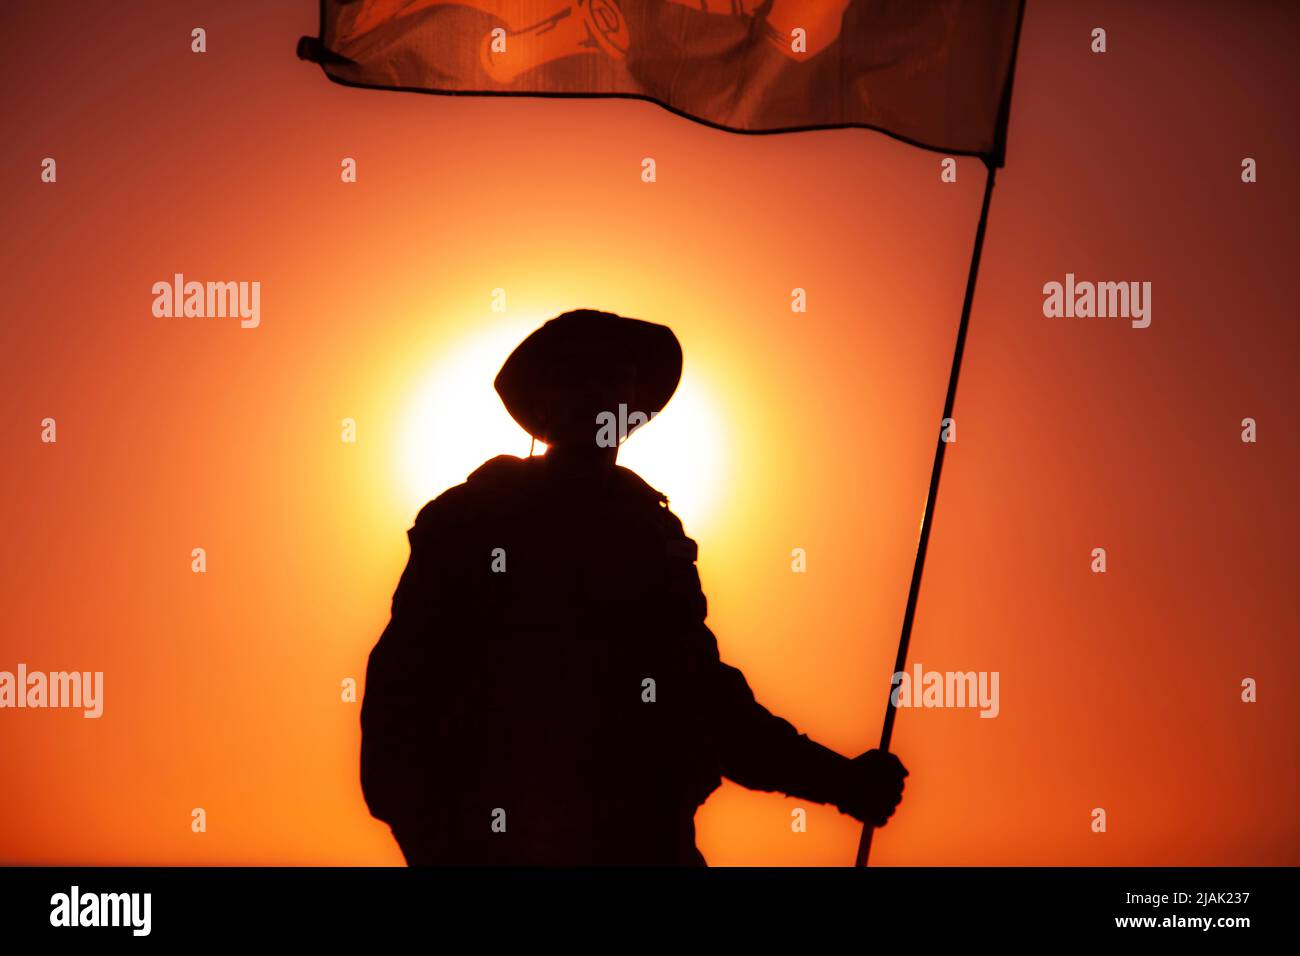 Silhouette of Army soldier waving a flag against a sunset sky in background. Stock Photo